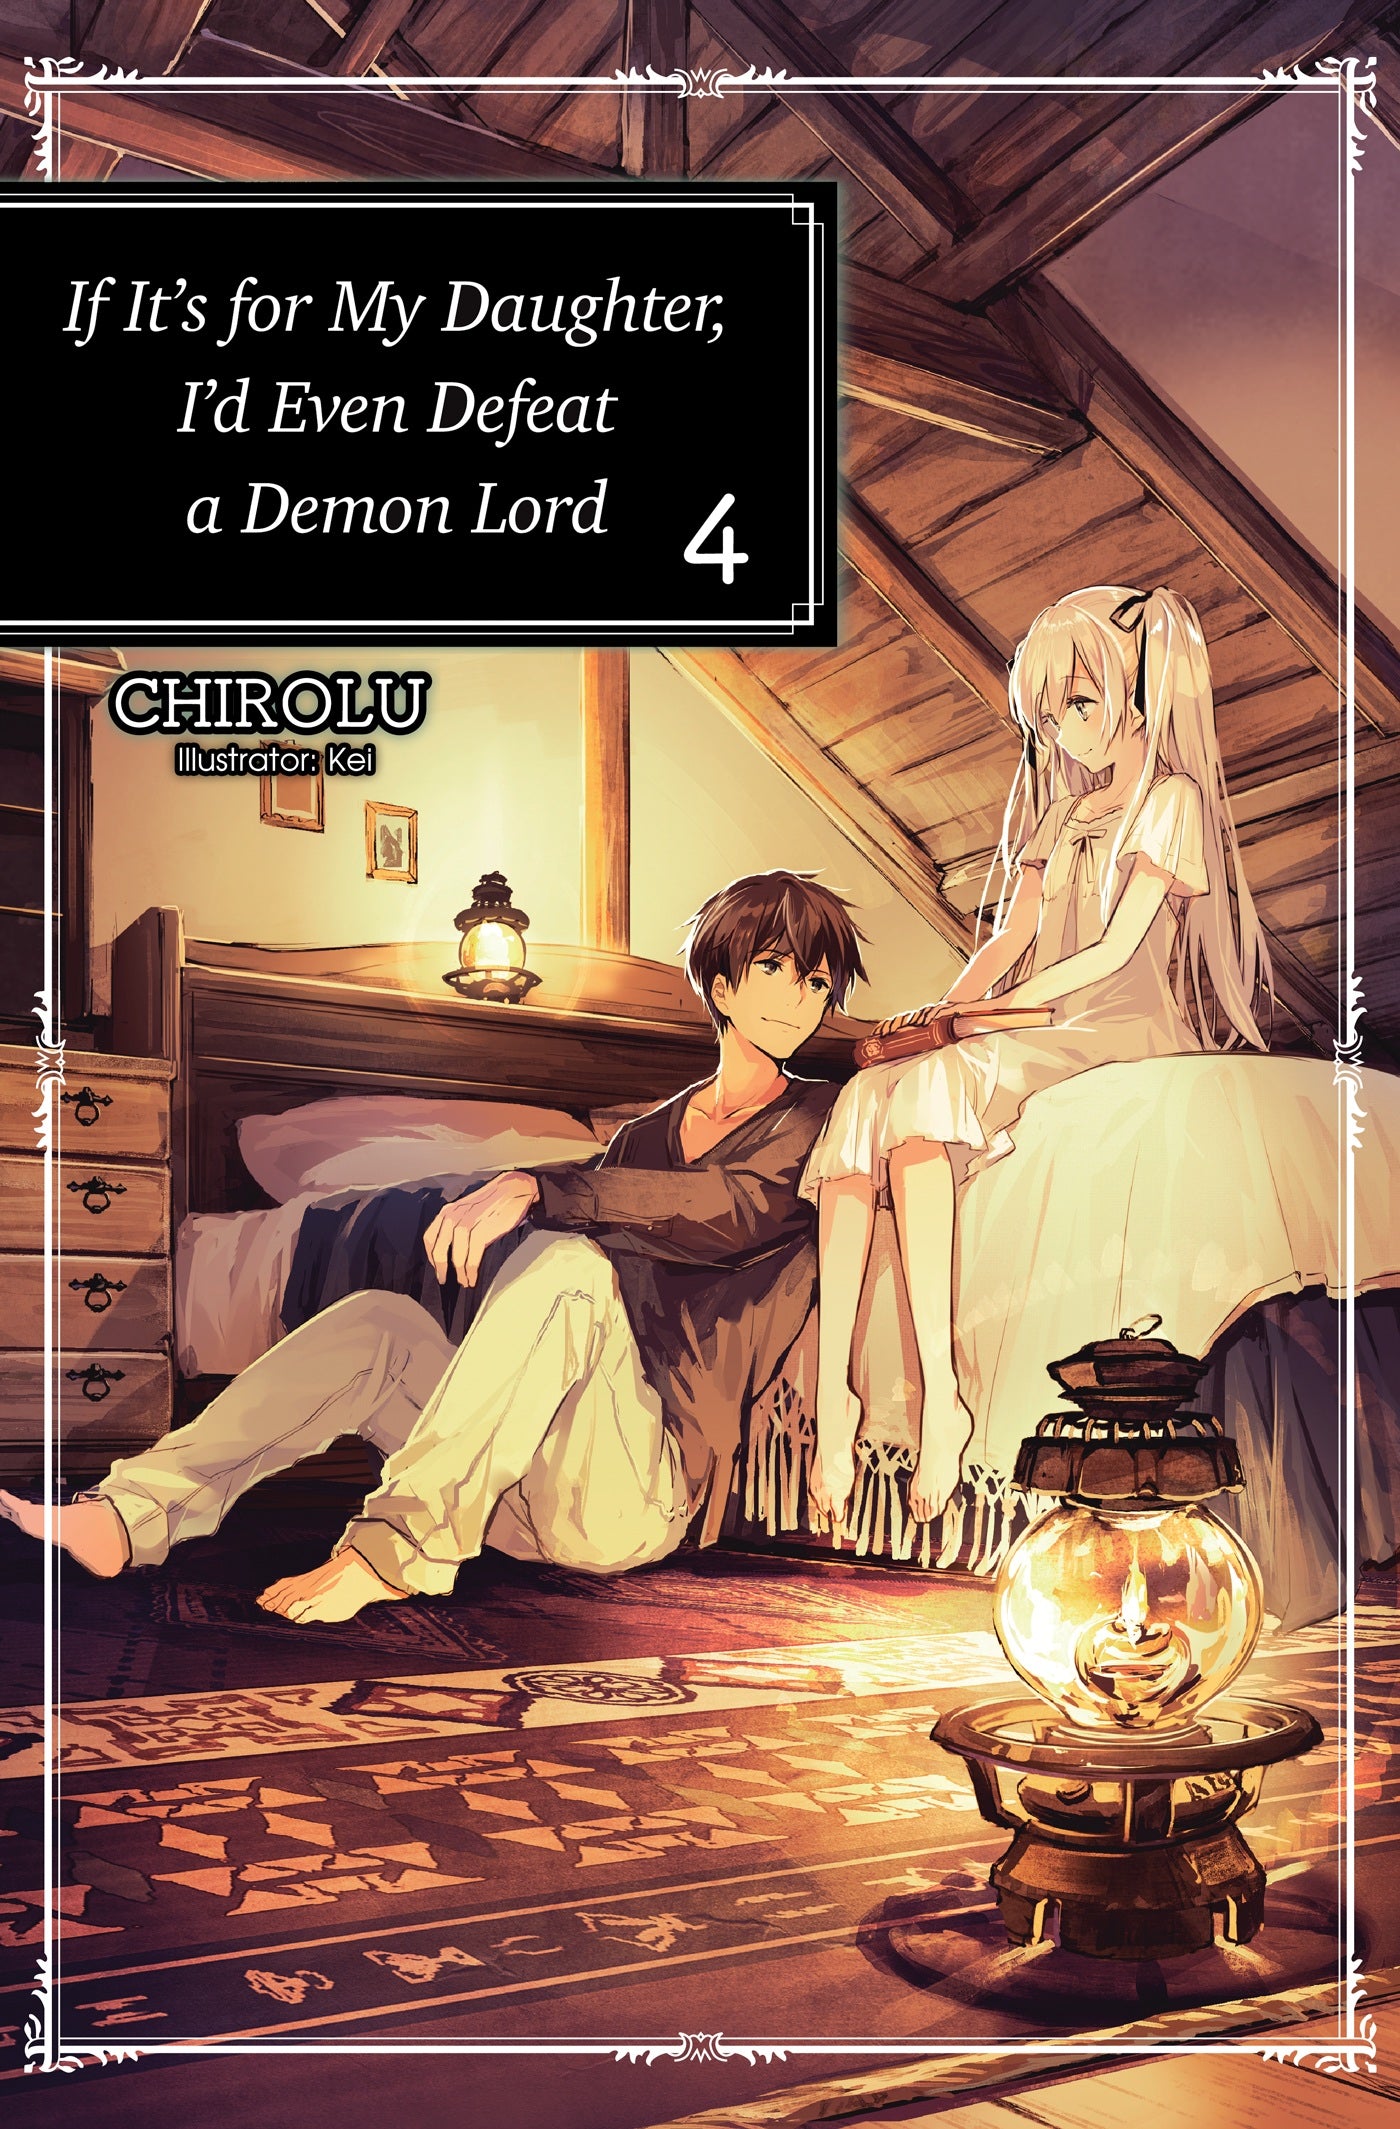 If It's for My Daughter, I'd Even Defeat a Demon Lord: Vol. 04 (Light Novel)